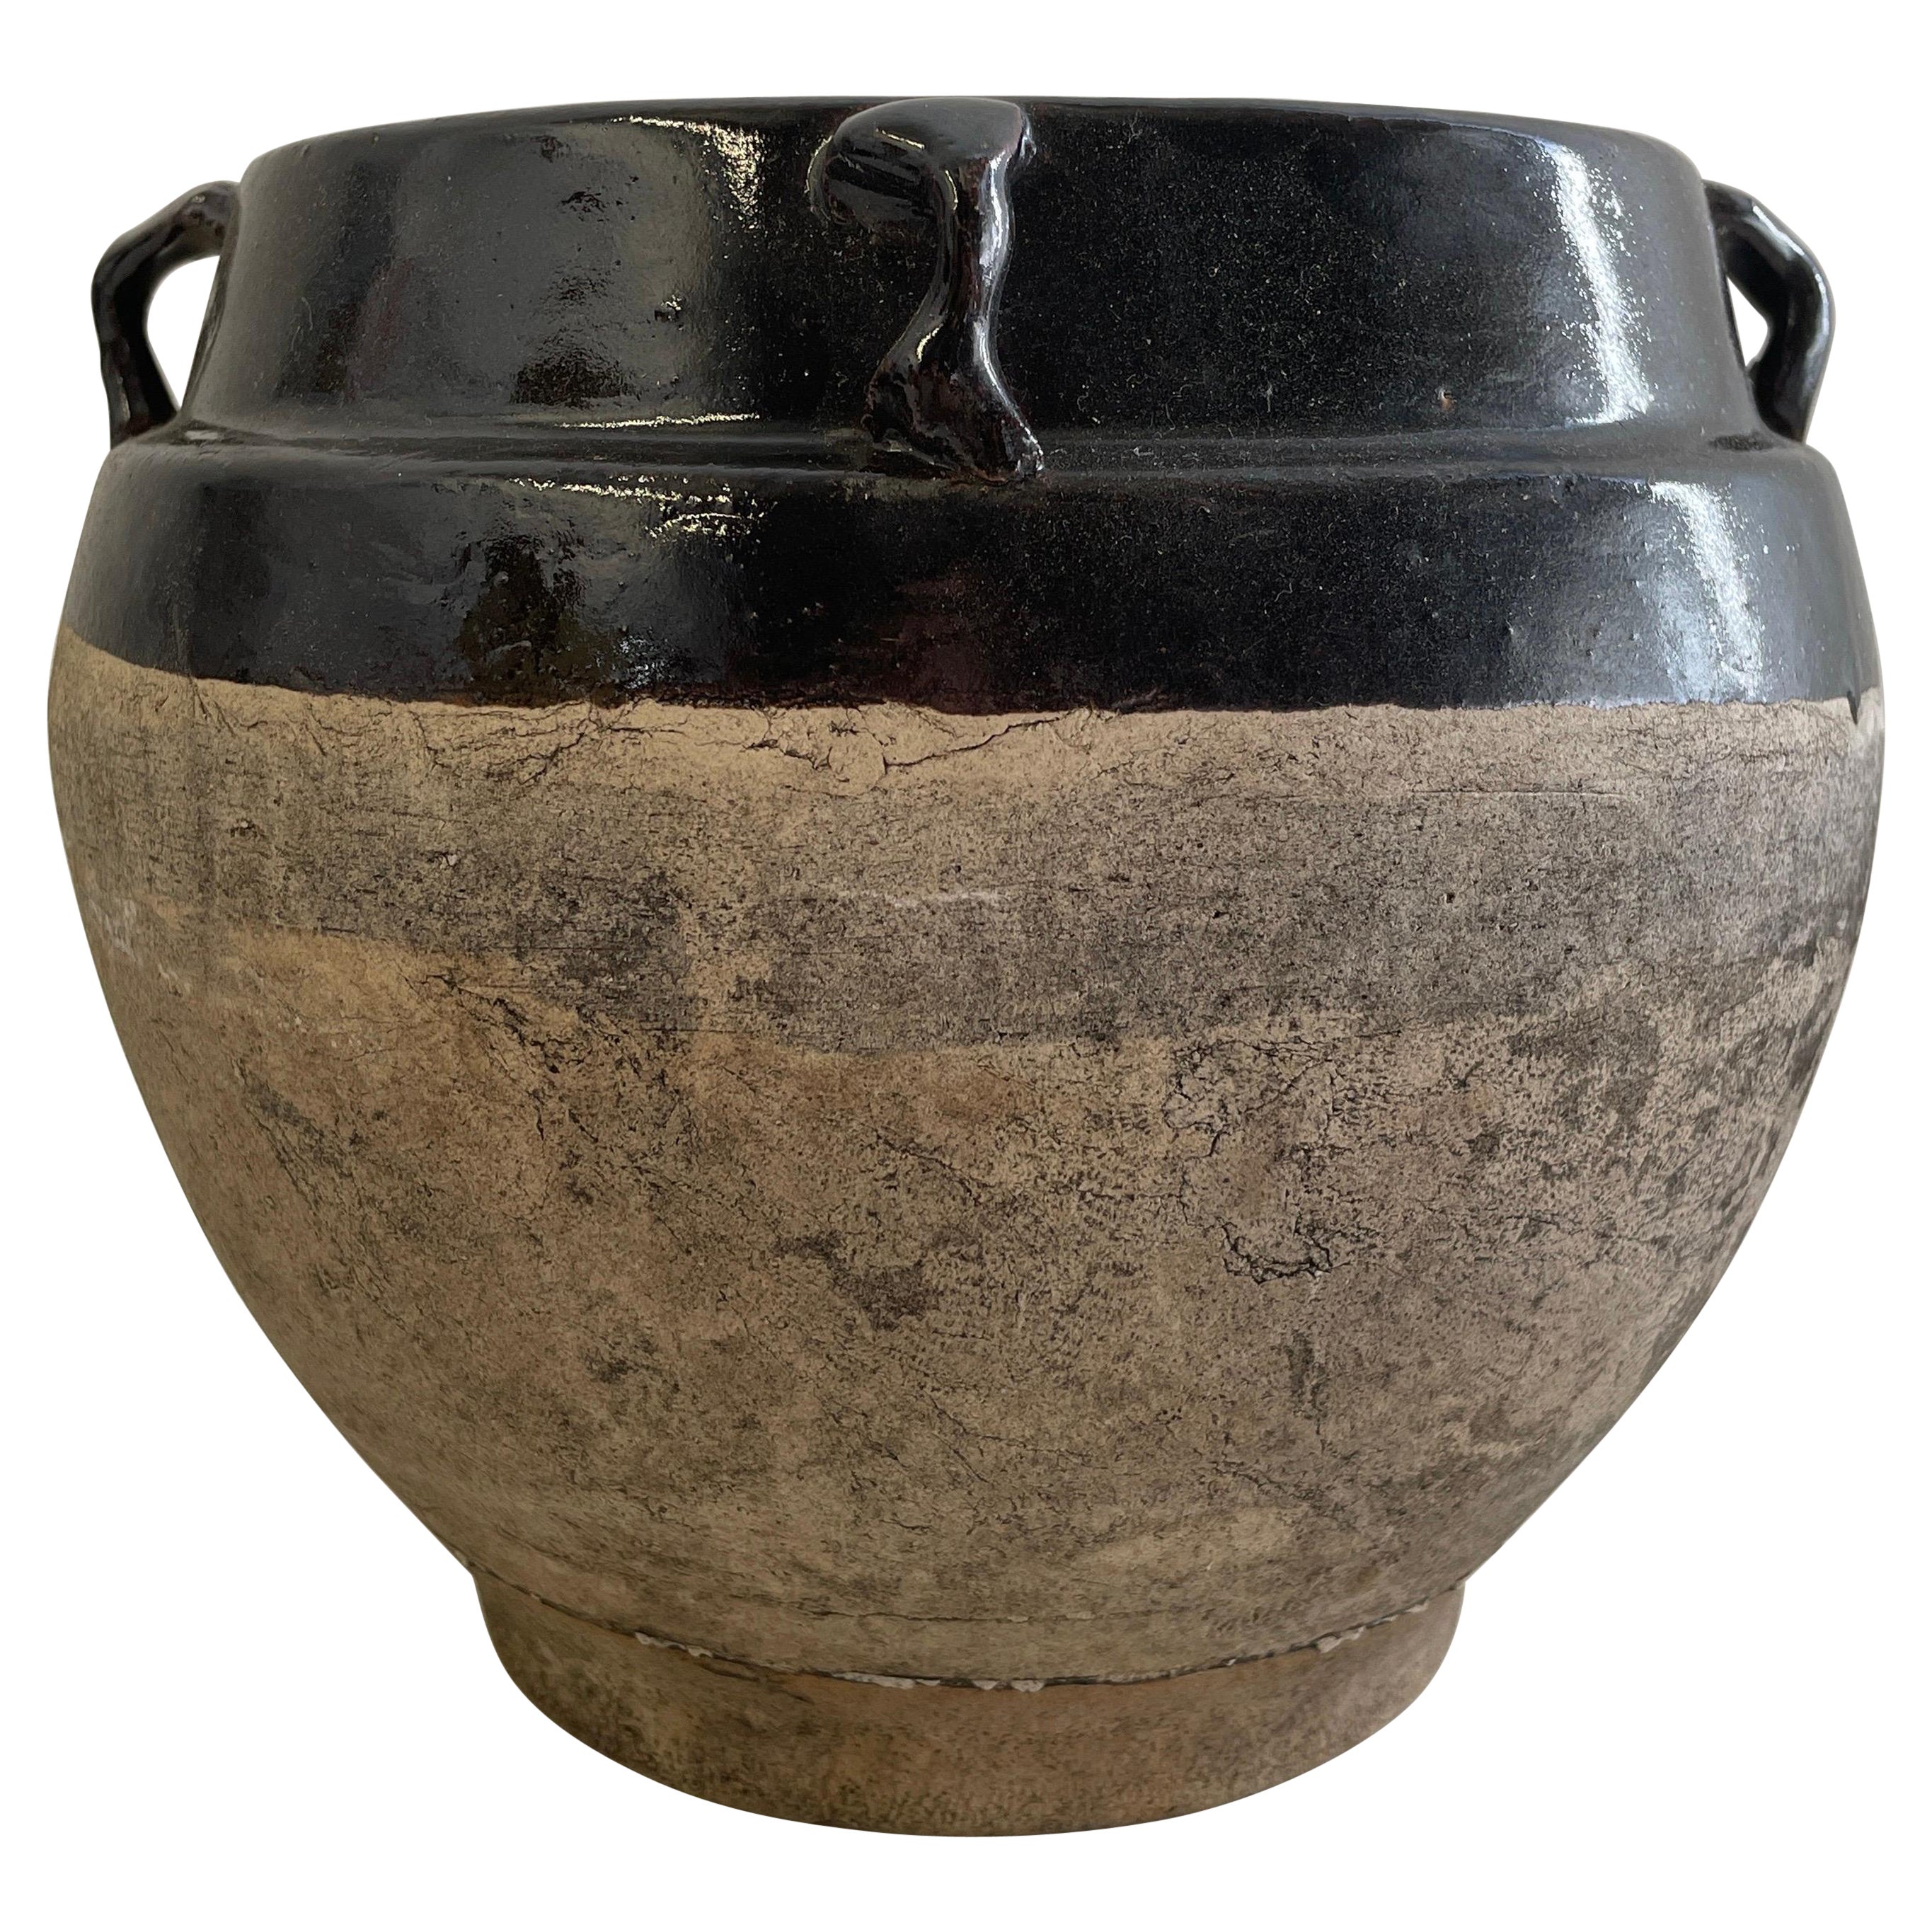 Black clay pots in USA, Clay Cookware in USA